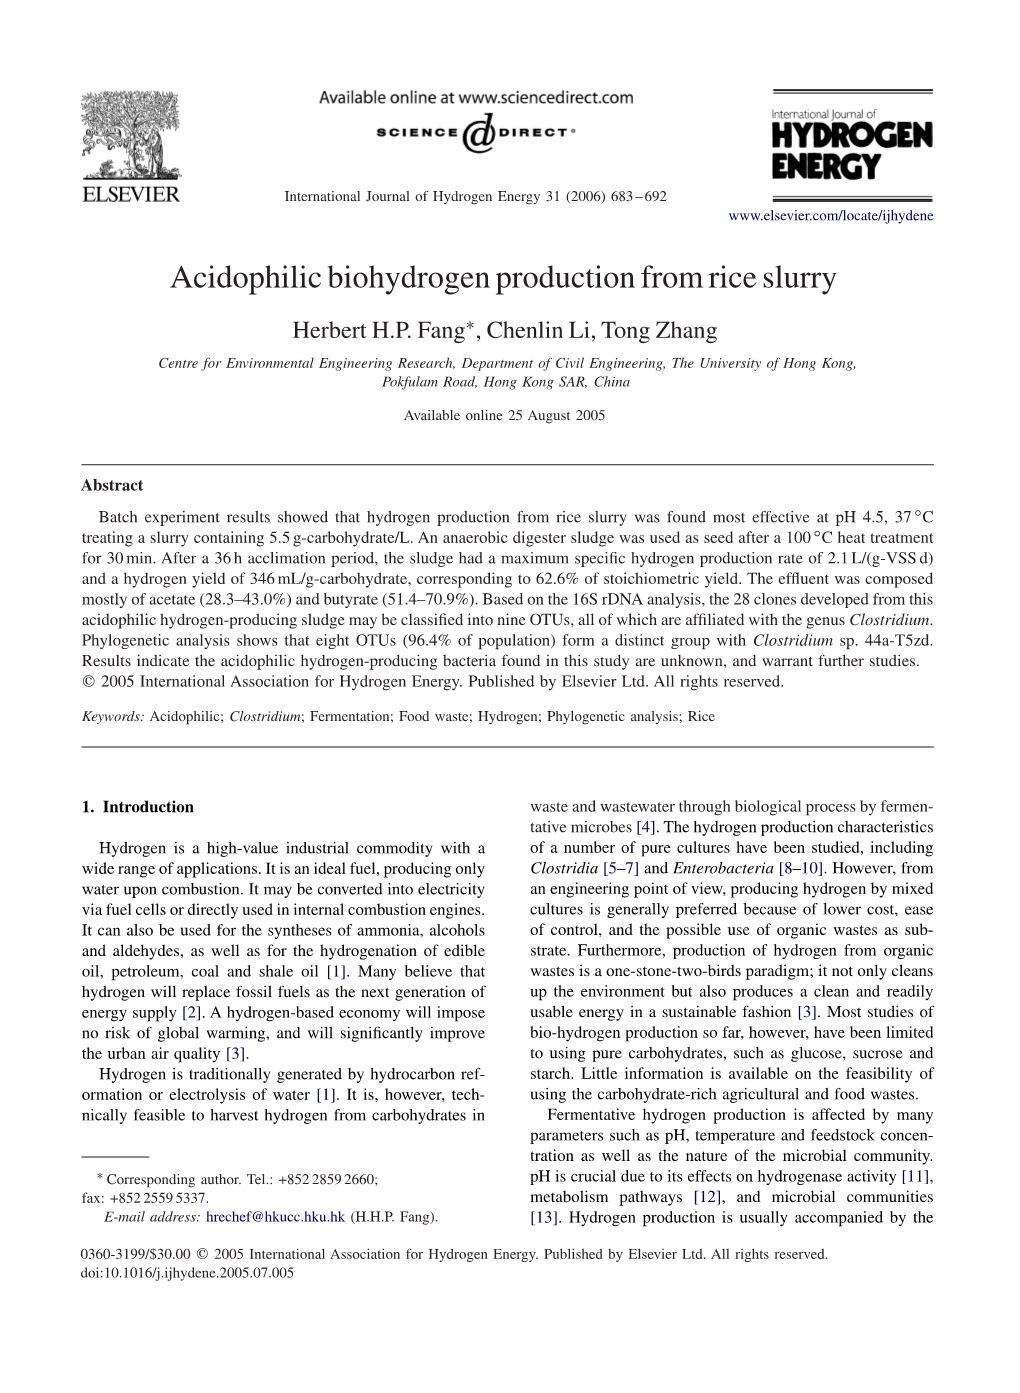 Acidophilic Biohydrogen Production from Rice Slurry